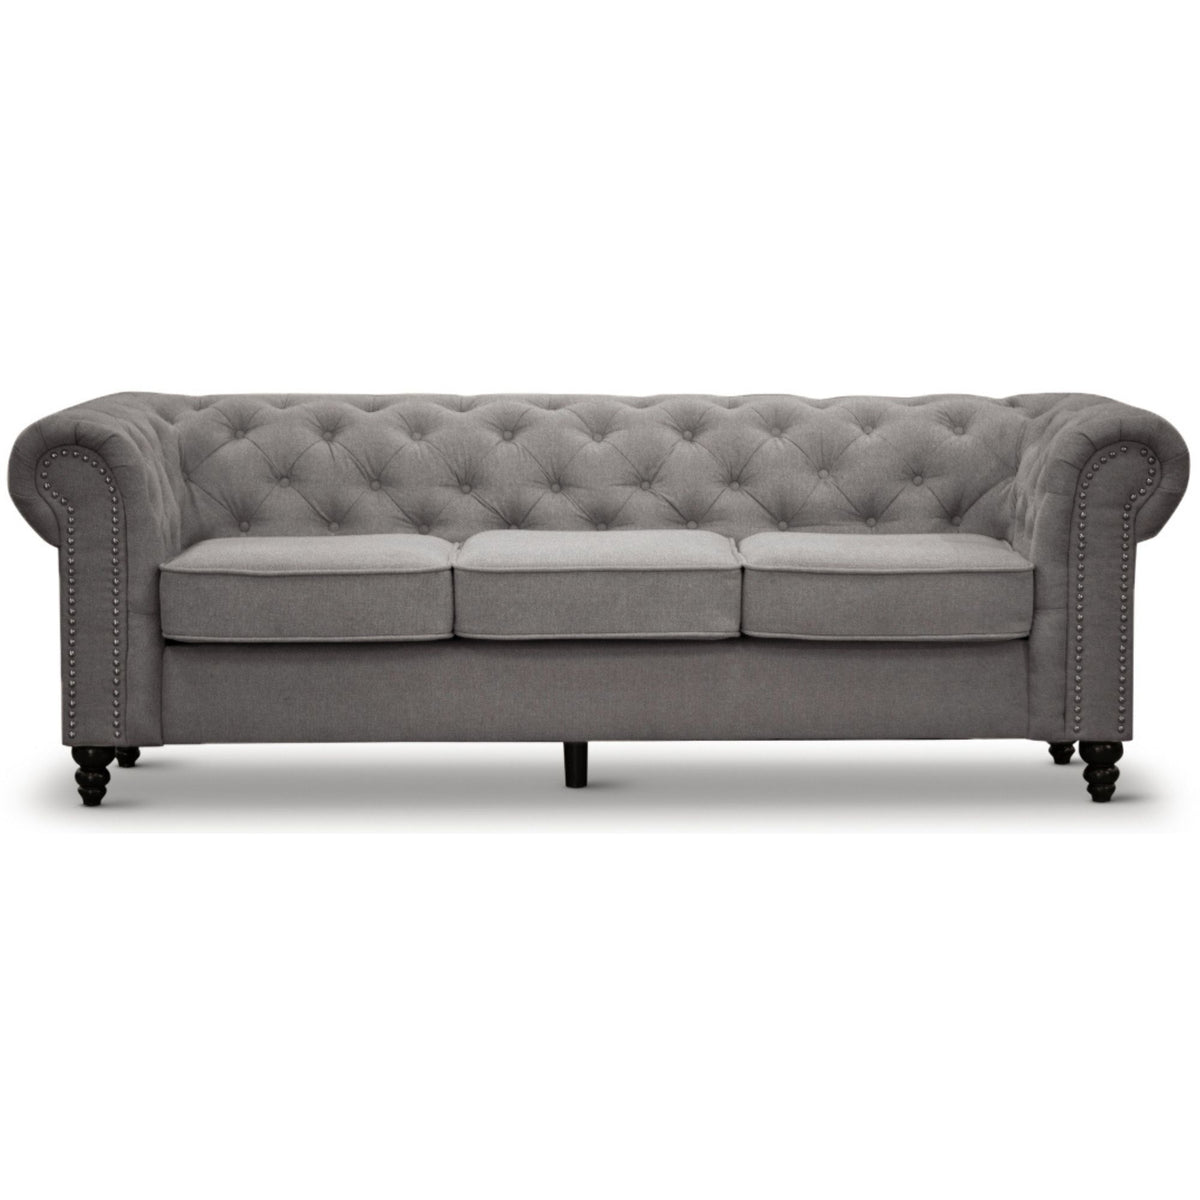 Kiho Chesterfield Fabric Upholstered 3 Seater Sofa  - Grey - Notbrand